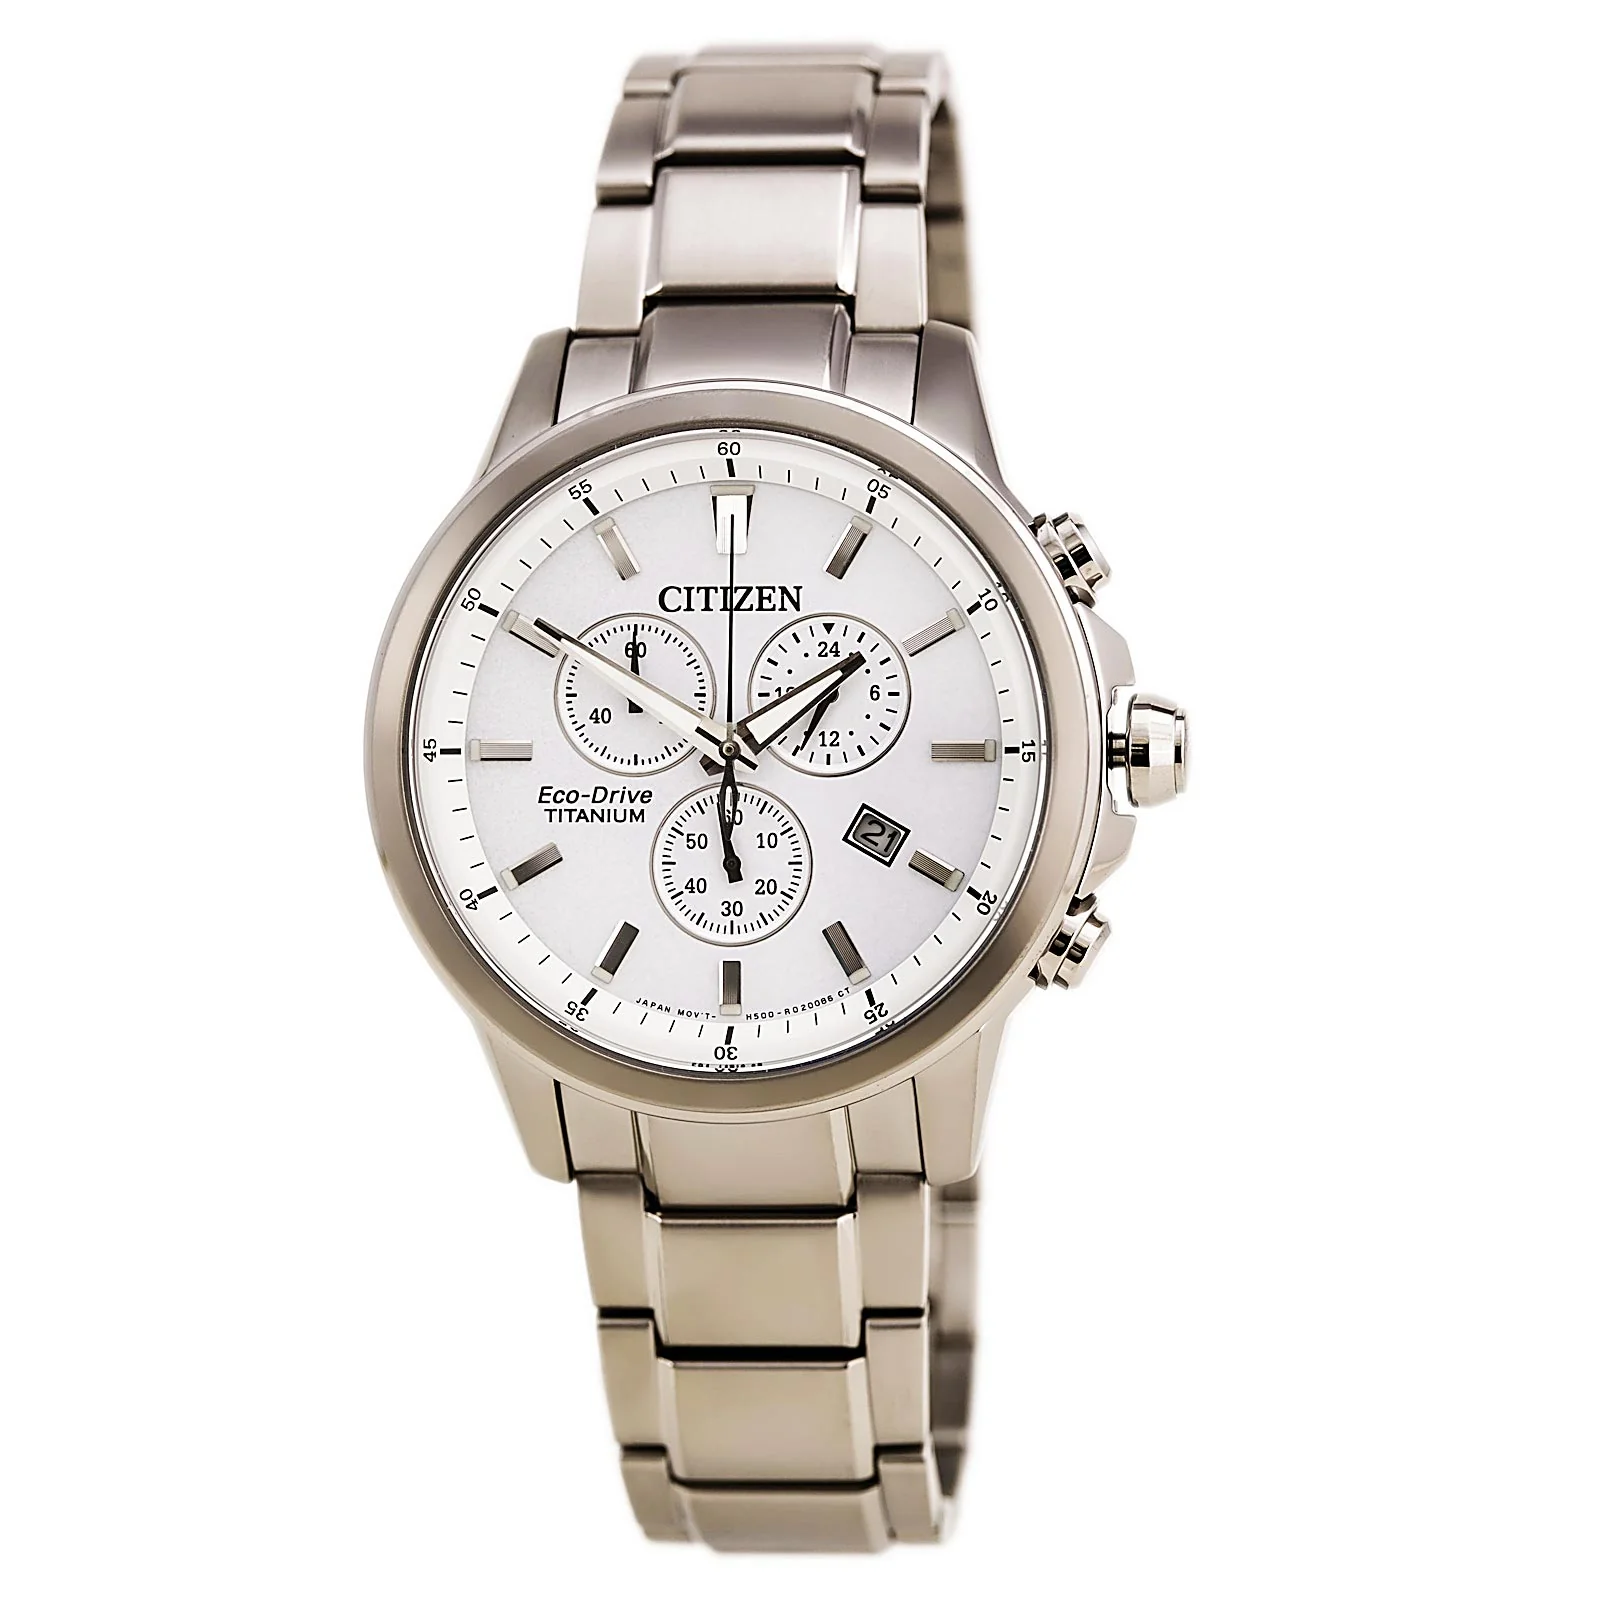 Eco-Drive Men's Stainless Steel Chronograph Watch